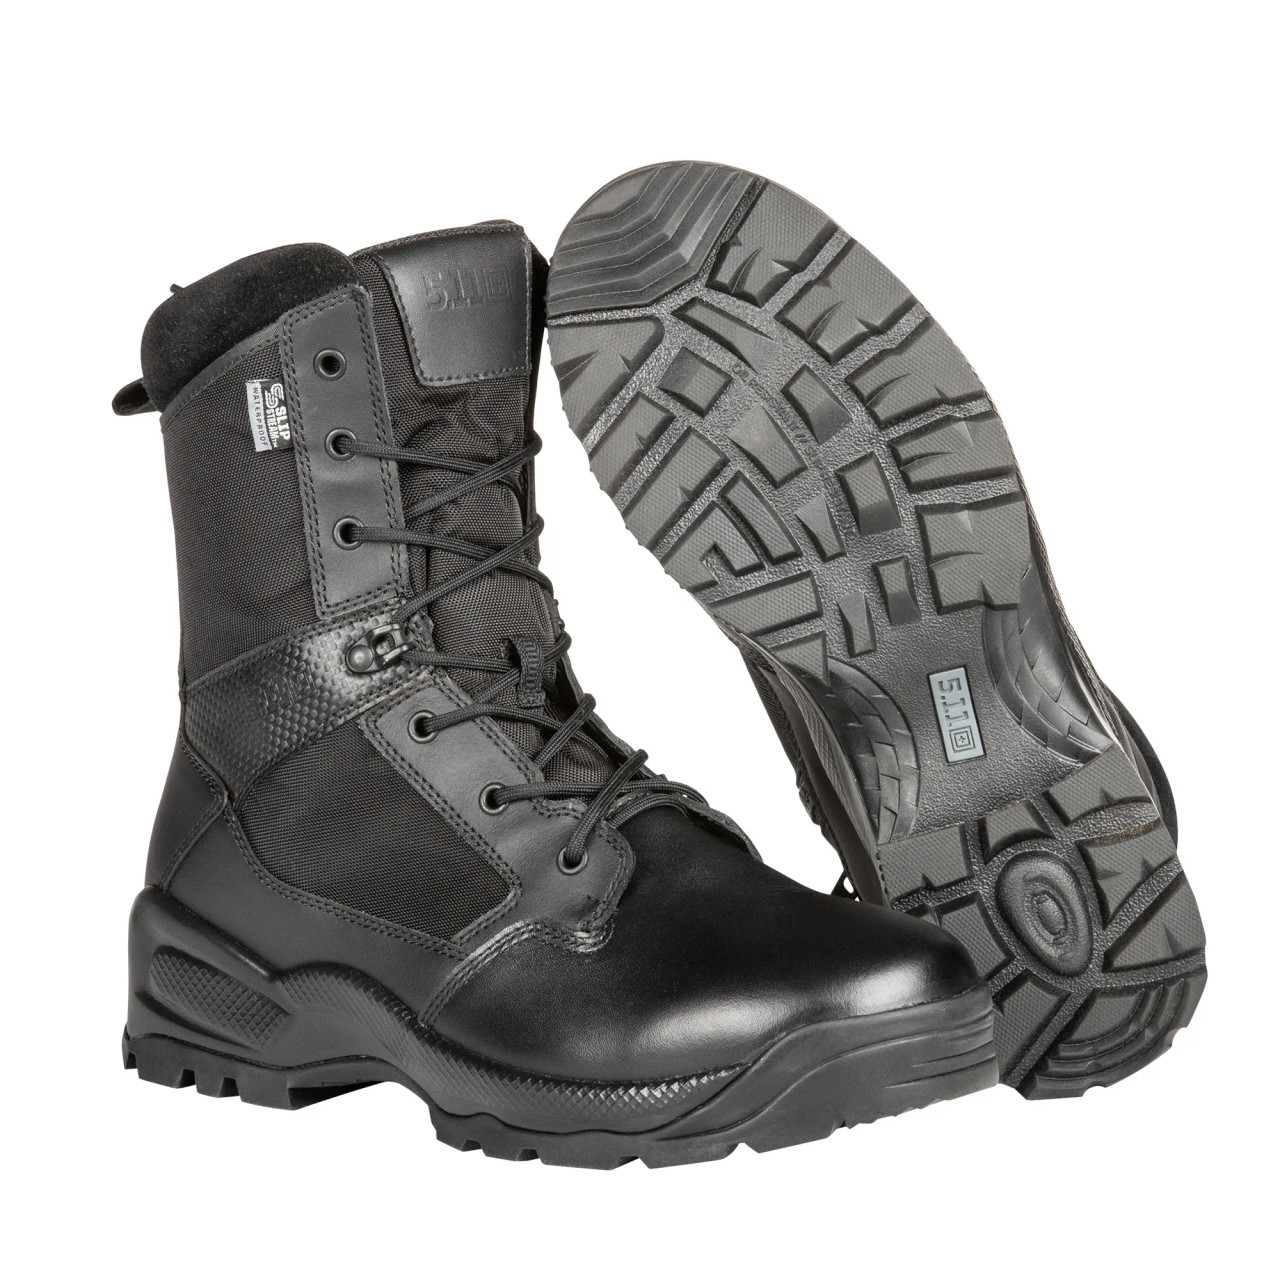 https://cdn11.bigcommerce.com/s-98f3d/images/stencil/1280x1280/products/1489/25813/5.11_Tactical_Womens_A.T.A.C._2.0_8_Boot_with_Side_Zip_Black_Main__02379.1664395563.jpg?c=2